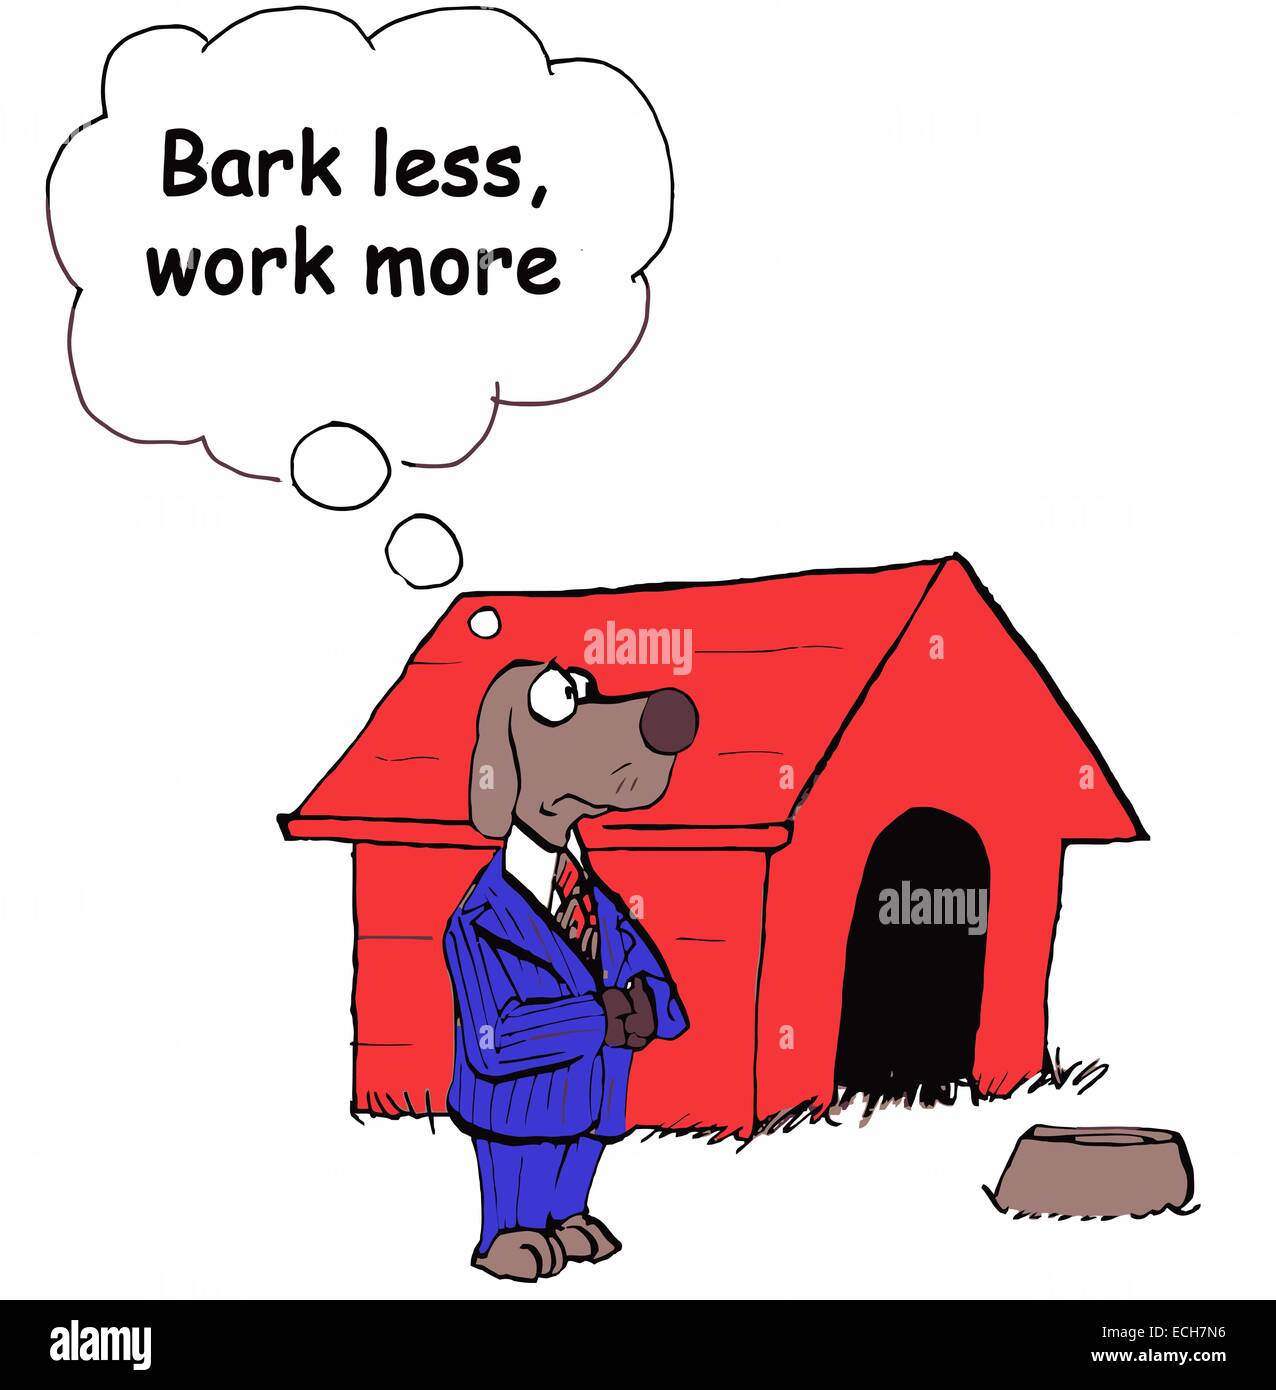 Dog, as businessman, is reminding himself to work more and bark less. Stock Vector